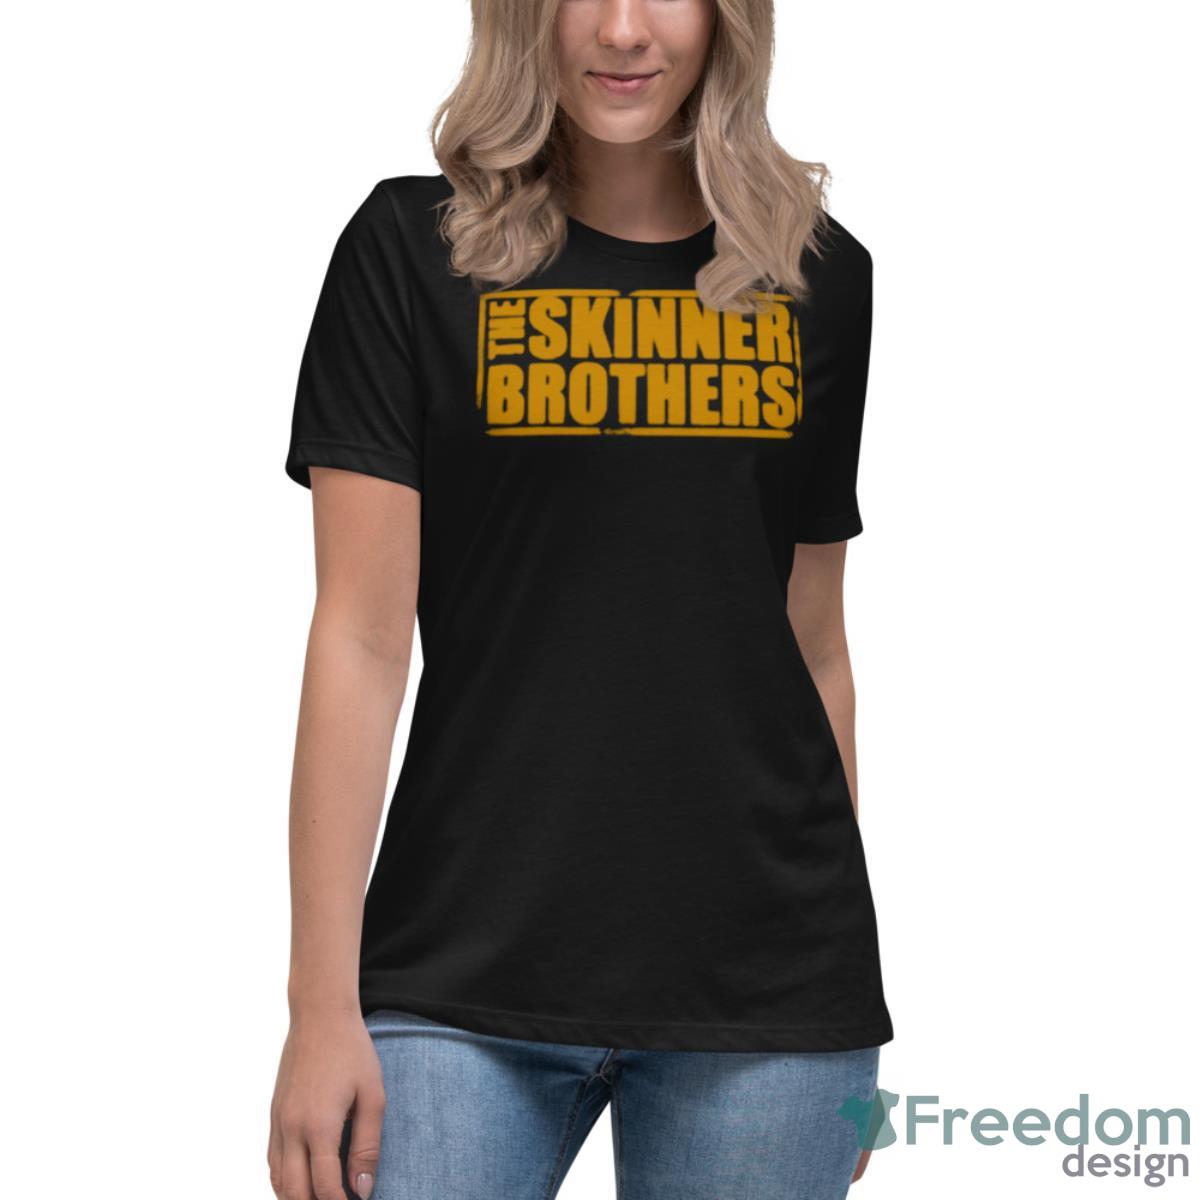 The Skinner Brothers Shirt